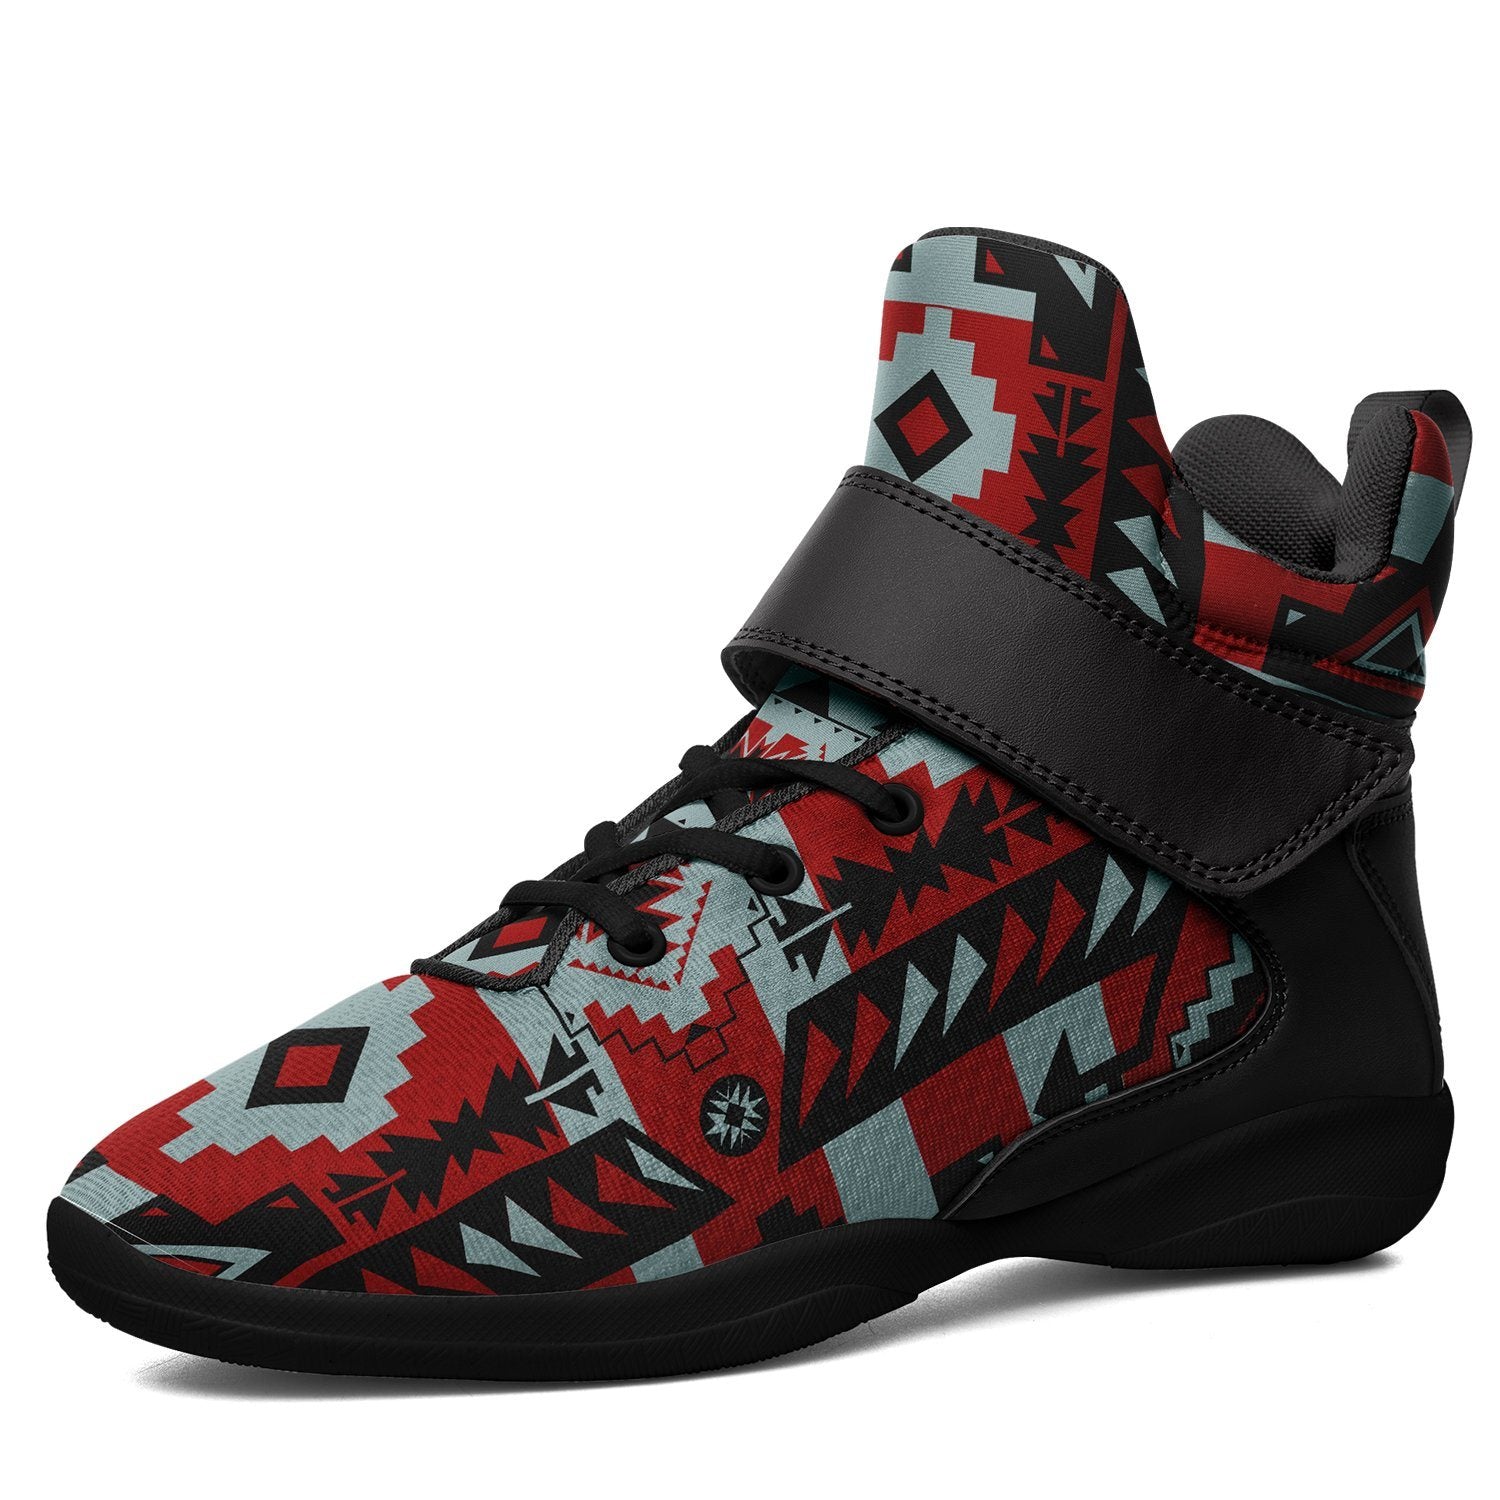 Chiefs Mountain Candy Sierra Dark Ipottaa Basketball / Sport High Top Shoes 49 Dzine US Women 4.5 / US Youth 3.5 / EUR 35 Black Sole with Black Strap 